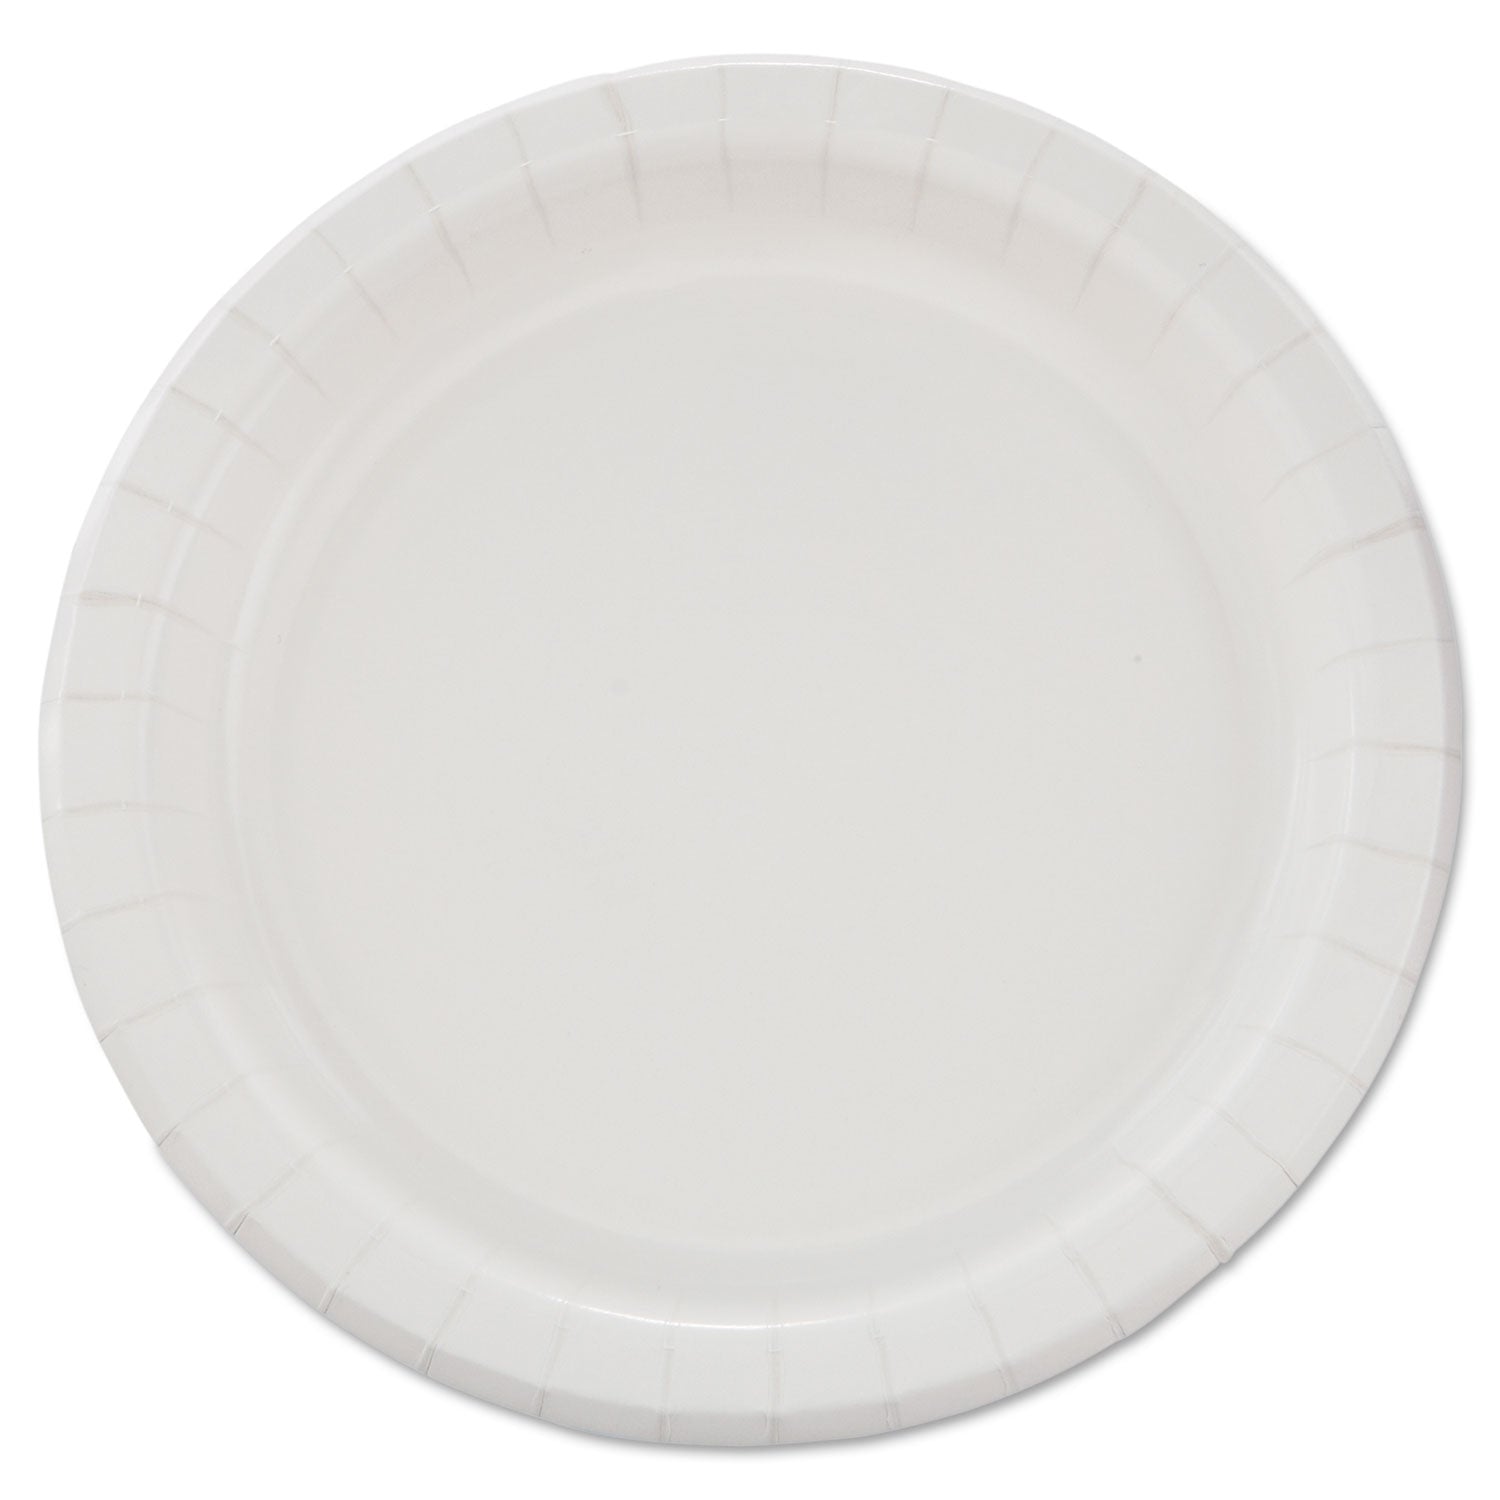 bare-eco-forward-clay-coated-paper-dinnerware-proplanet-seal-plate-85-dia-white-125-pack-4-packs-carton_sccmp9br2054 - 1